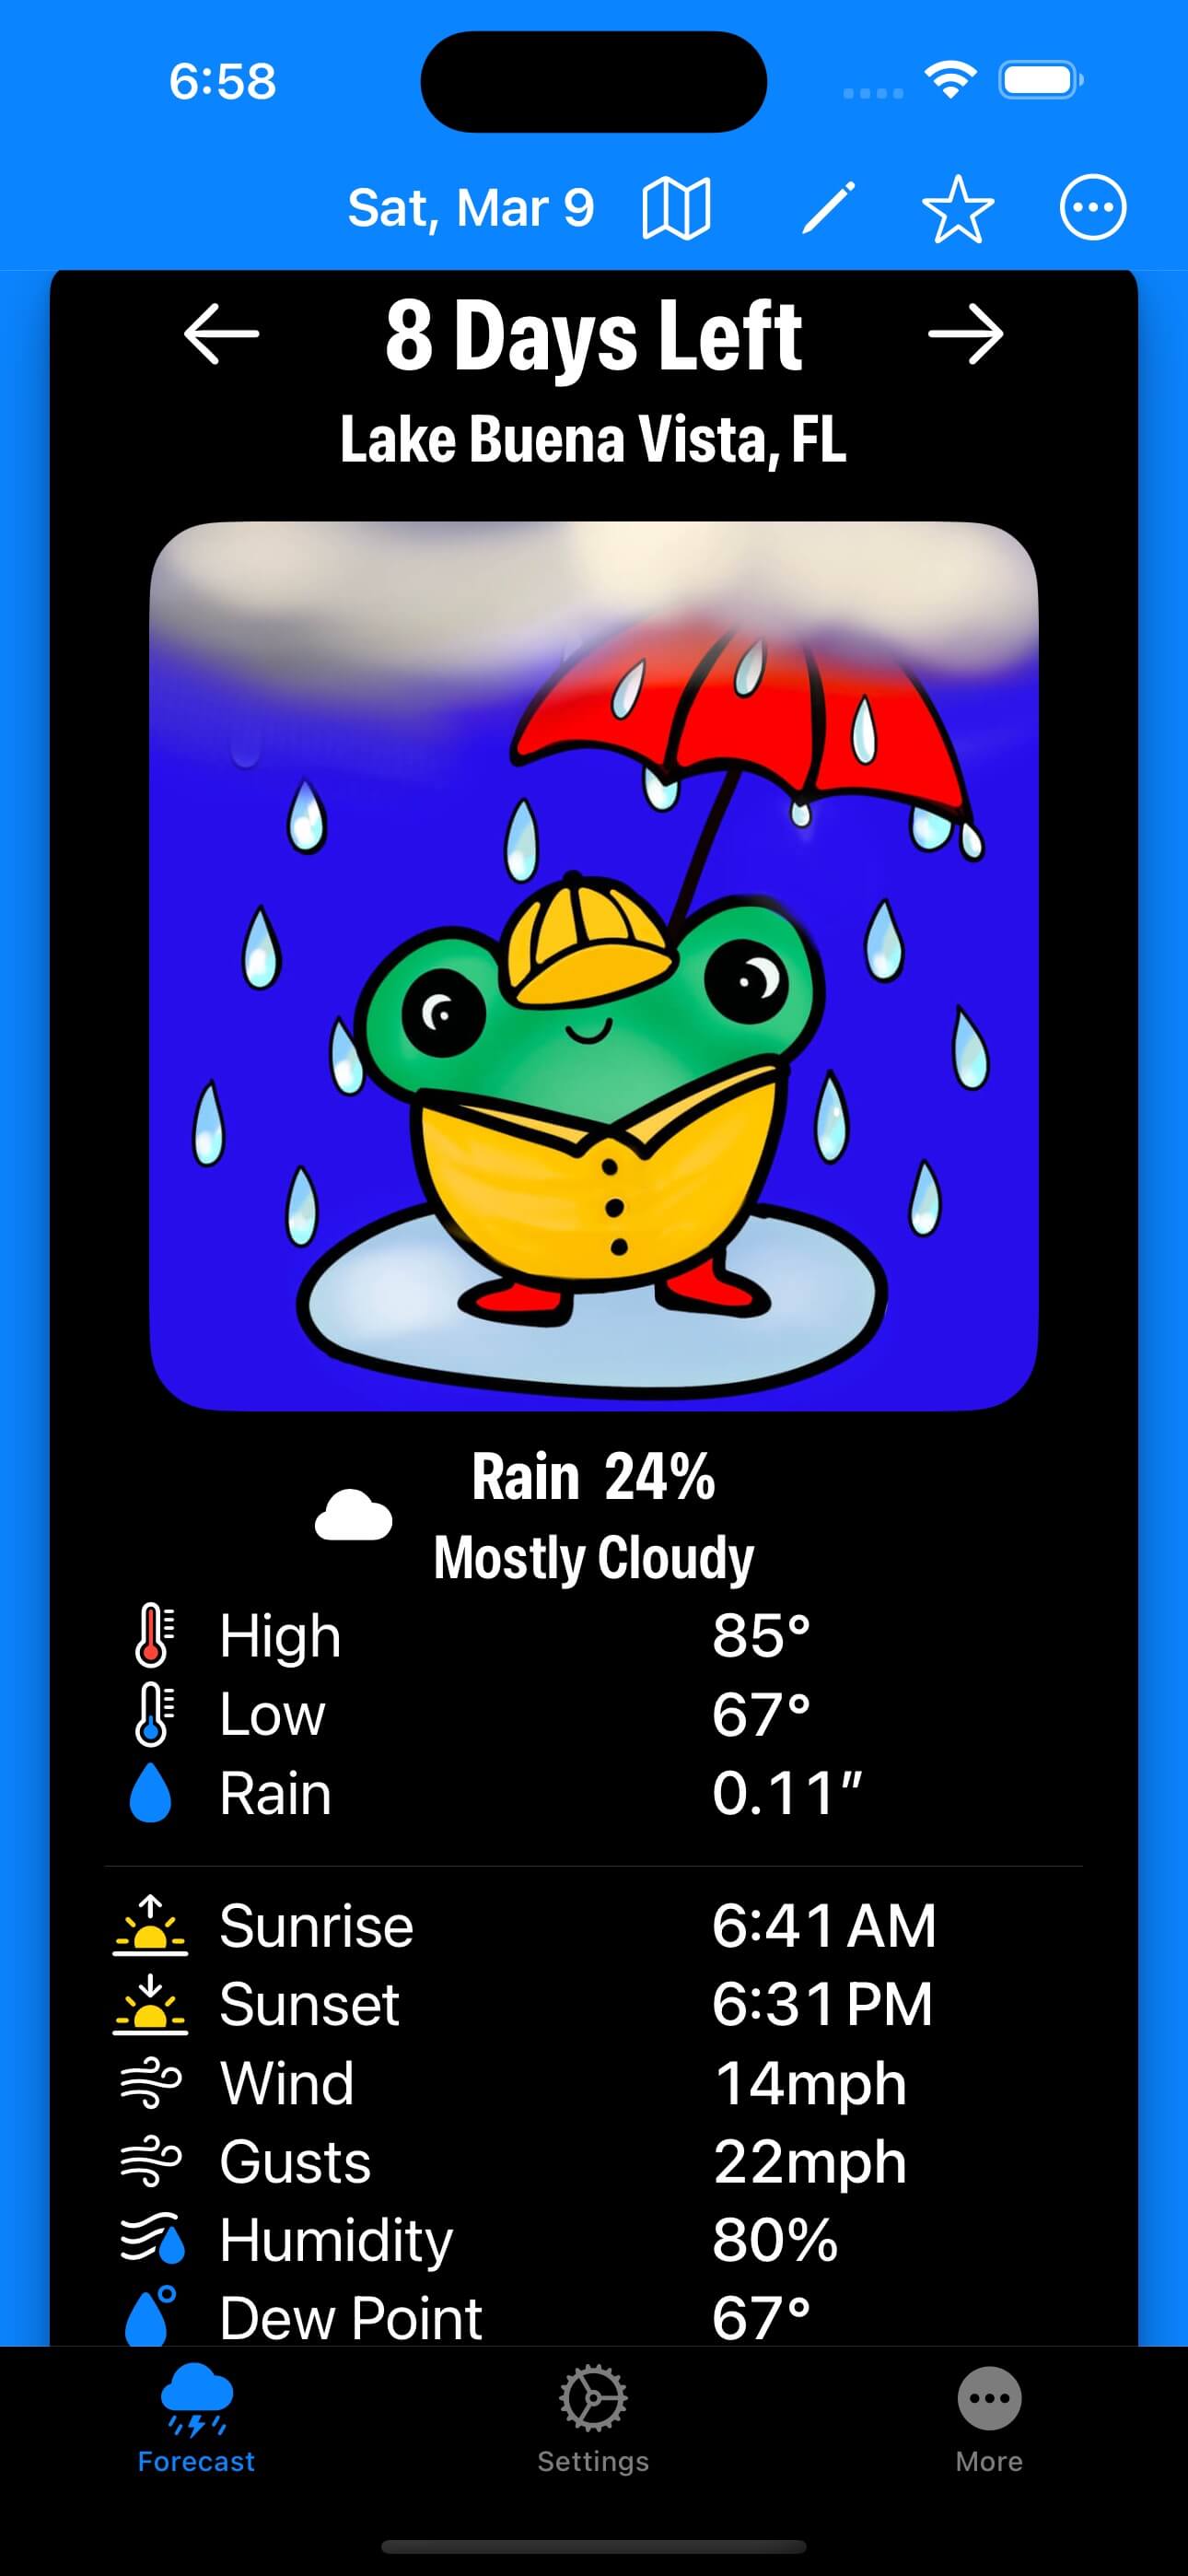 A screenshot of Please Don&rsquo;t Rain showing the forecast for Orlando with a smiling puppy image present.